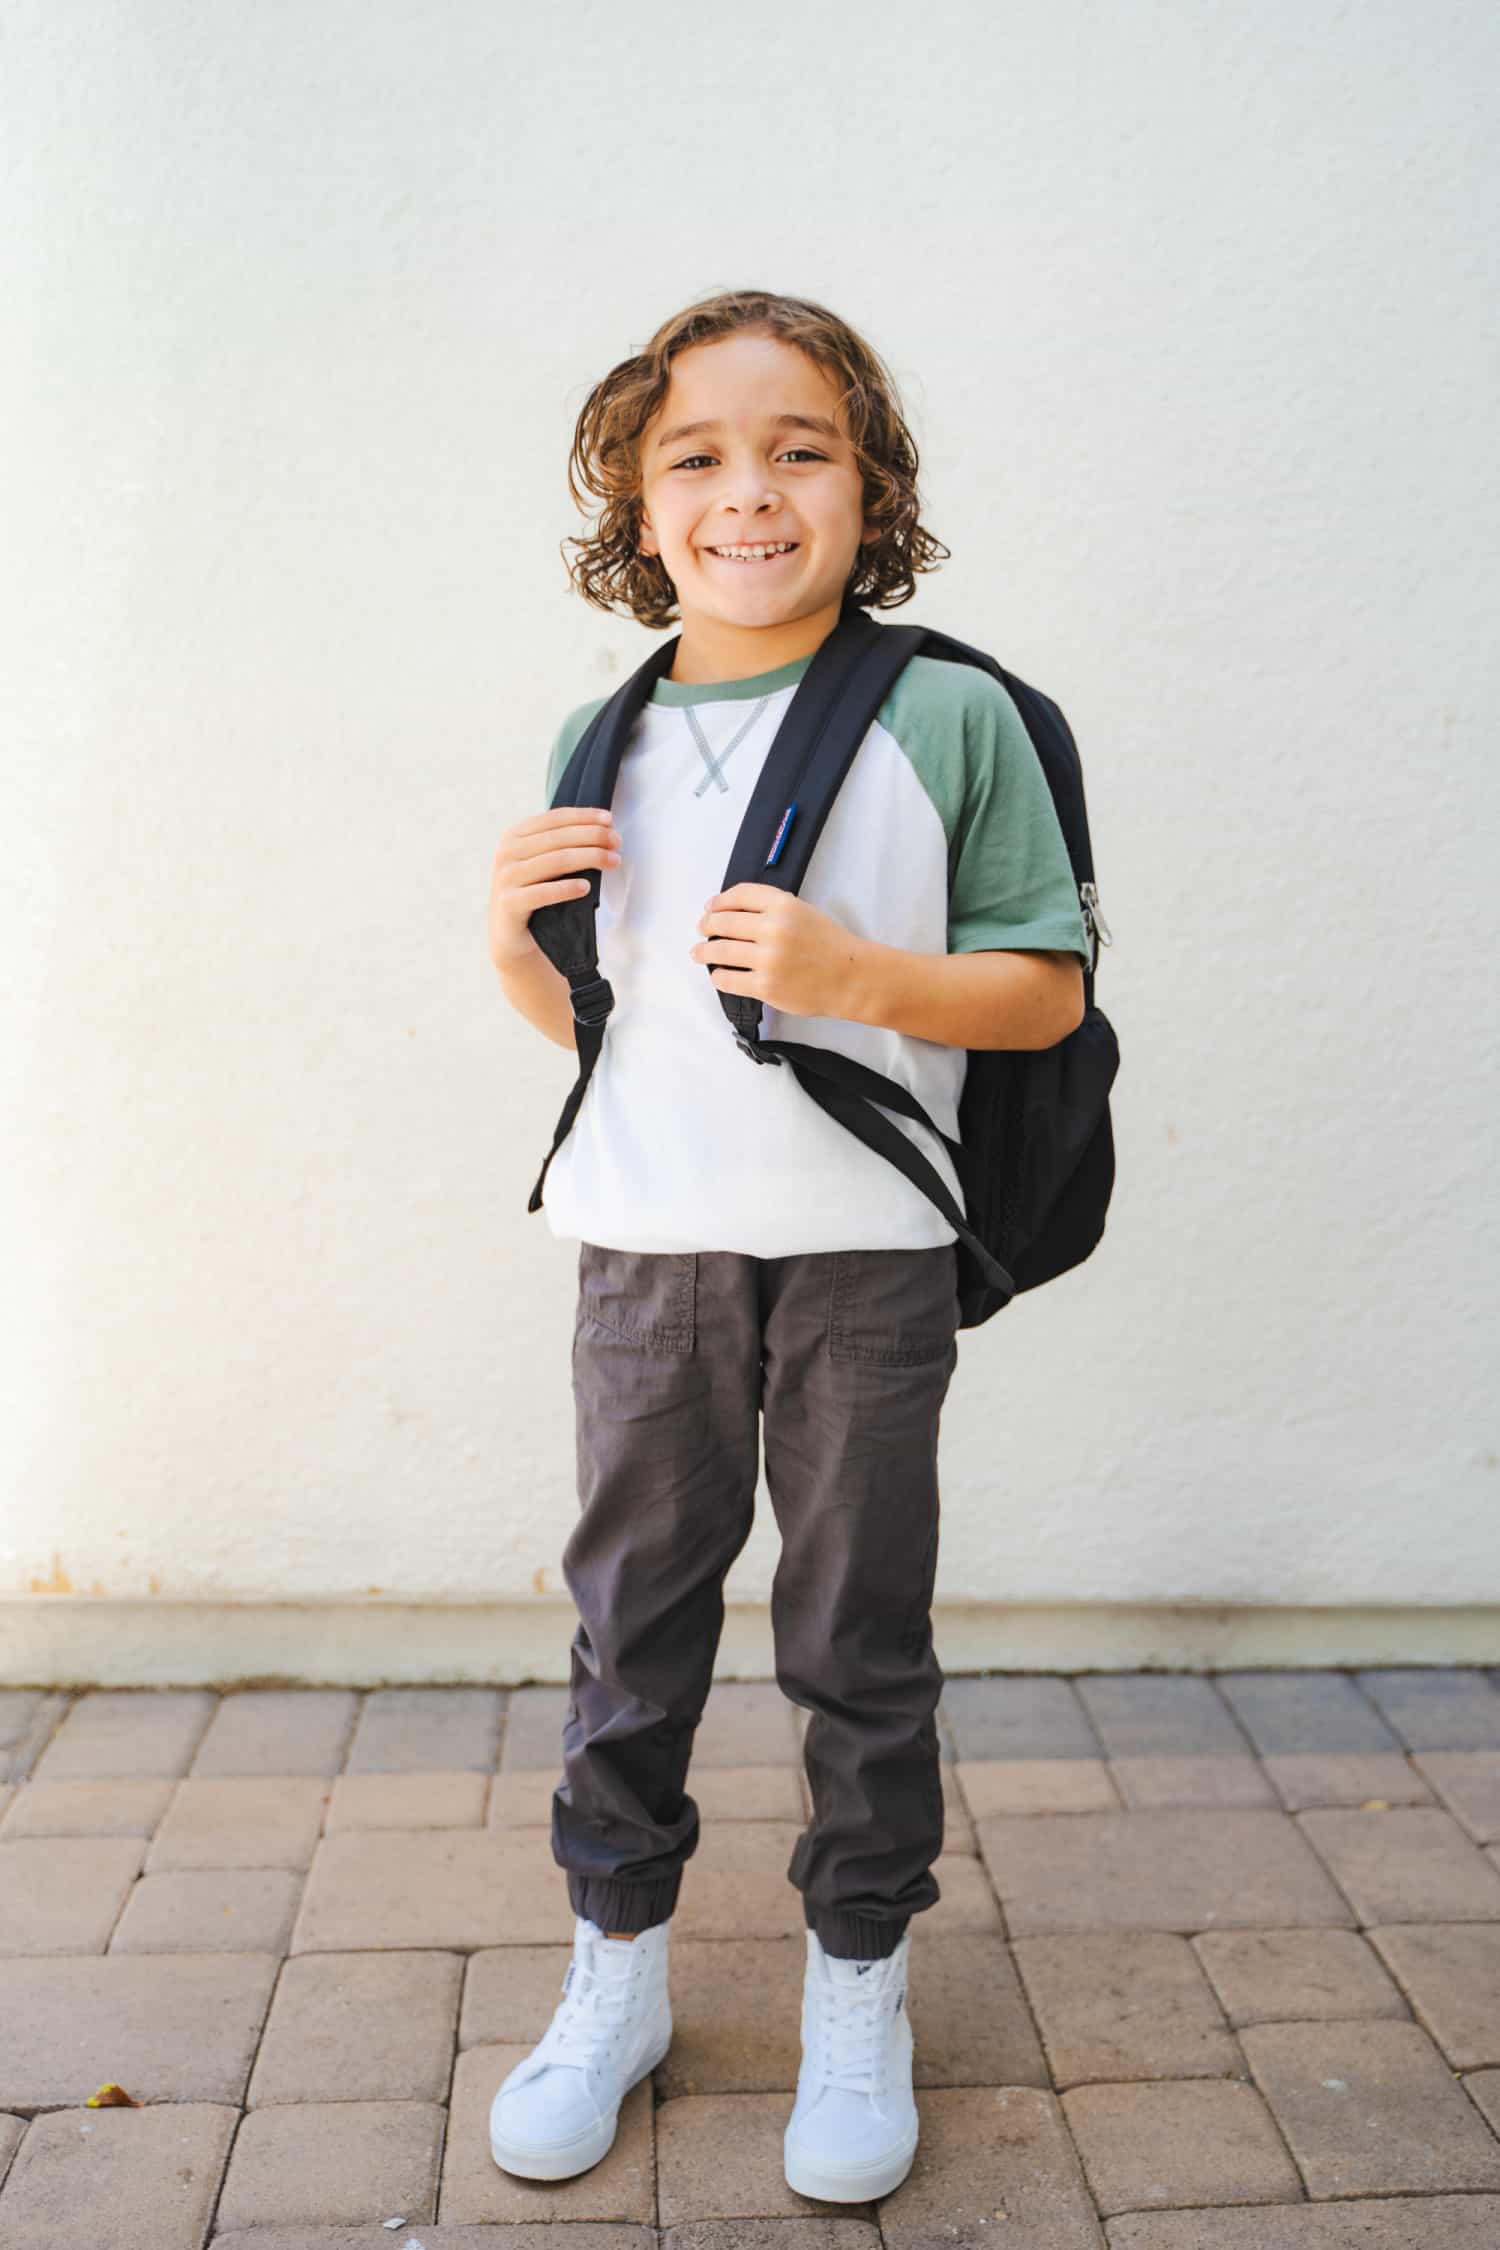 An adorable, smiling young boy wearing a backpack and looking ready for the new school year.